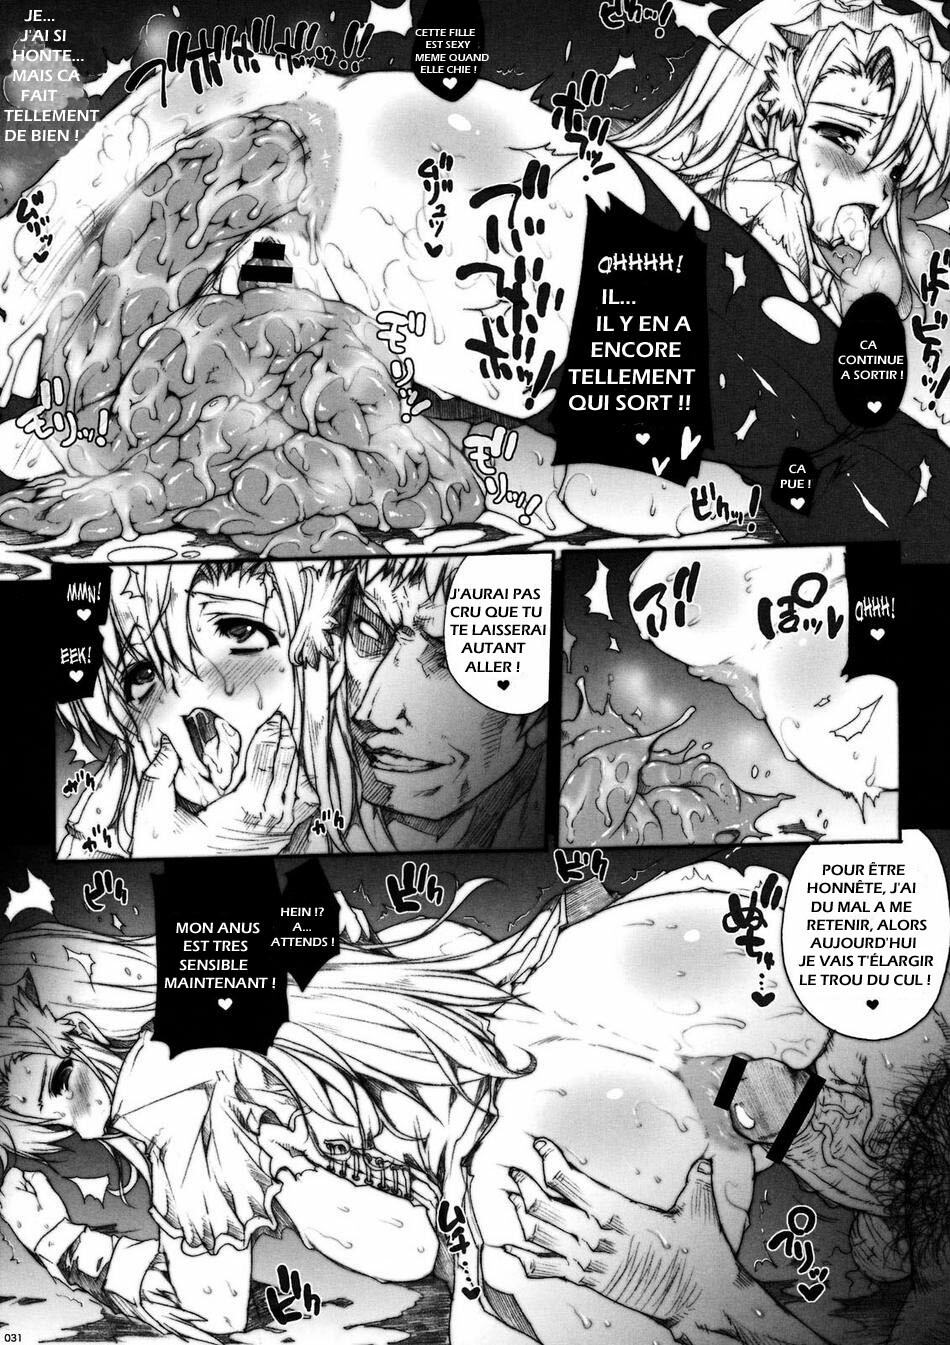 (COMIC1☆3) [ERECT TOUCH (Erect Sawaru)] Invisible Hunter (Monster Hunter) [French] page 31 full